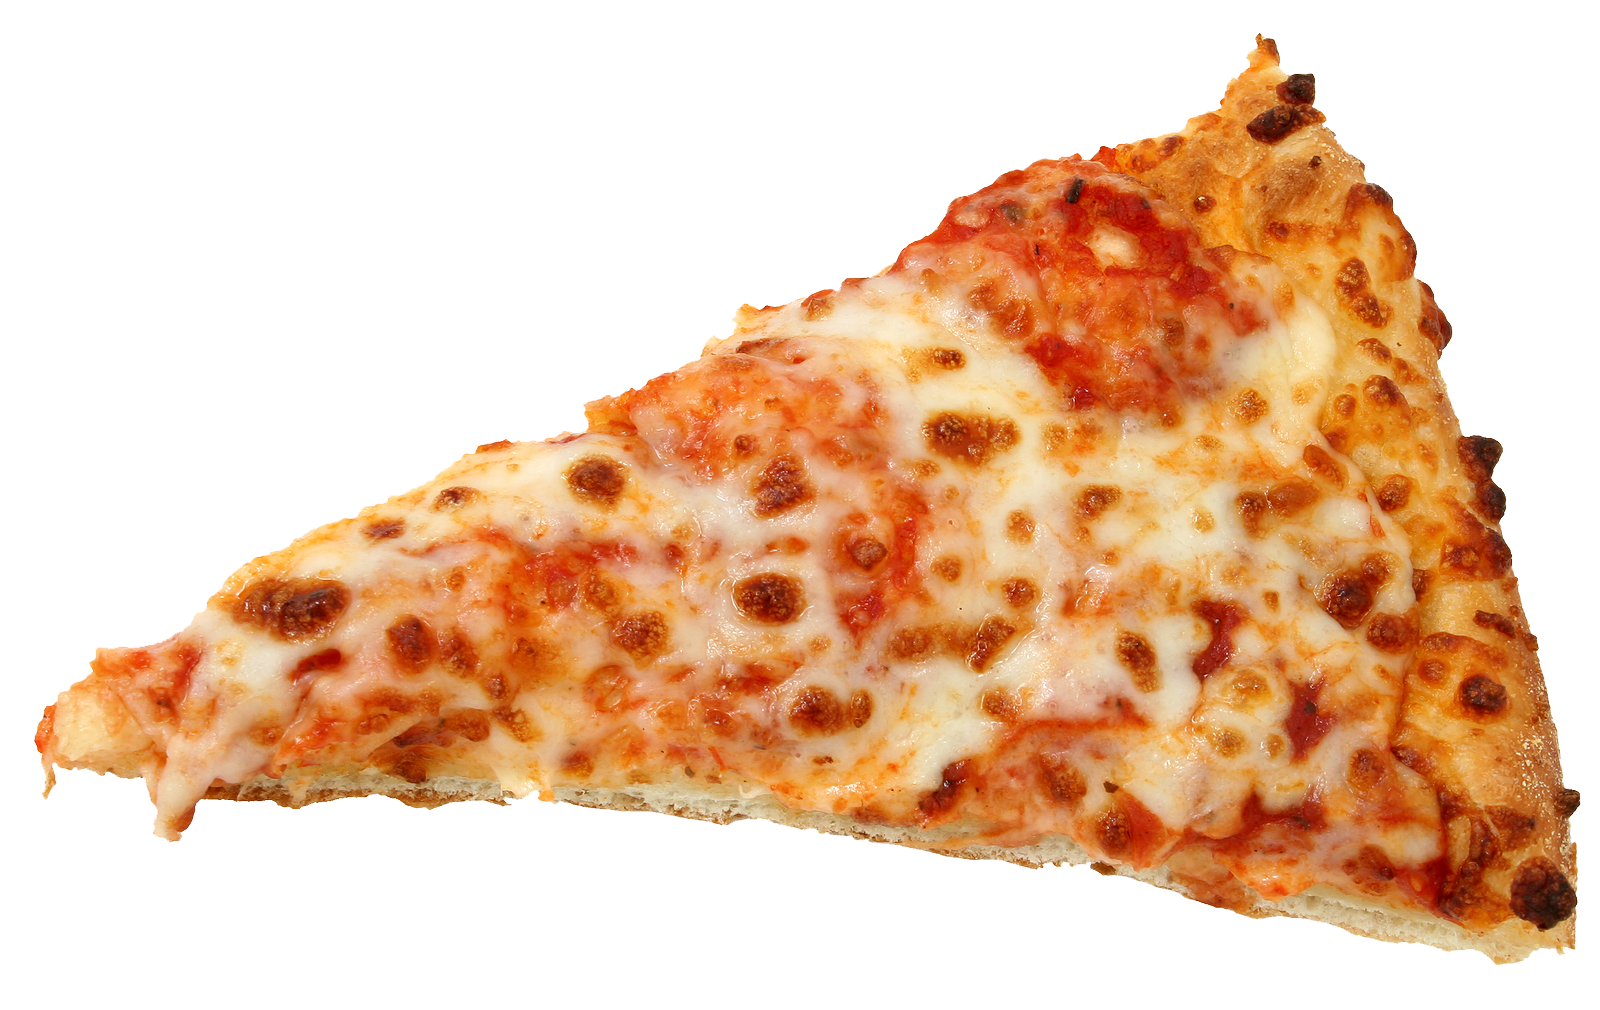 Pizza Slice PNG Clipart